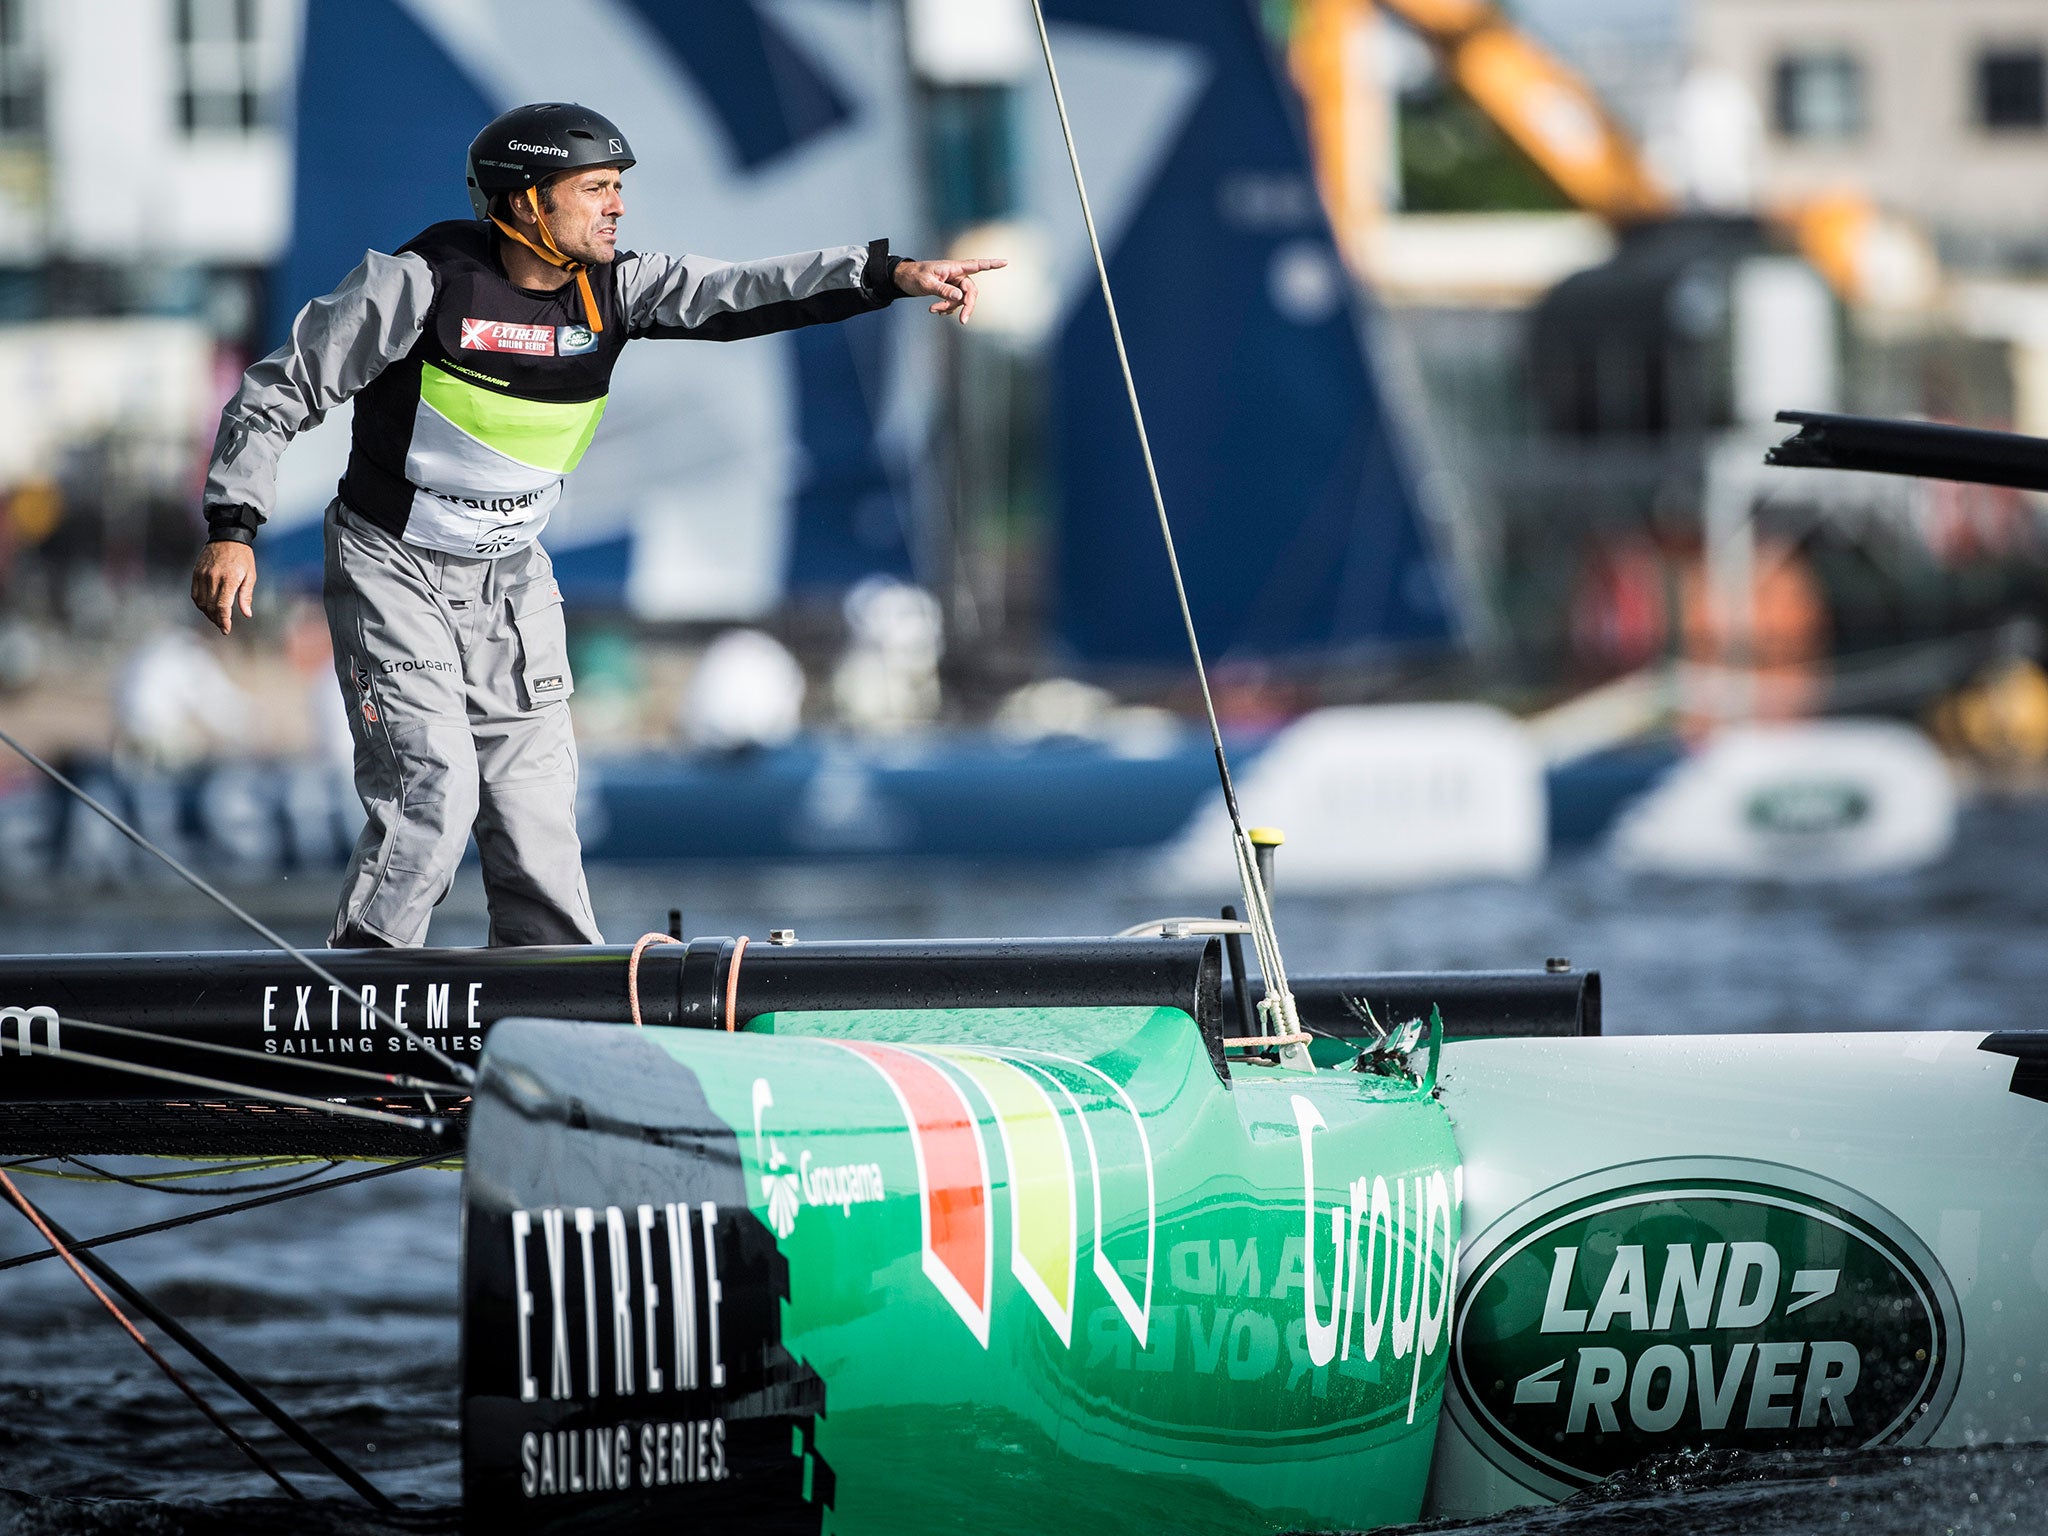 Dona you toucha my boat! Franck Cammas is not happy as rival GAC Pindar pierces his boat, Groupama, at the Extreme Sailing Series regatta in Cardiff, forcing the French skipper to sit out the second day for repairs